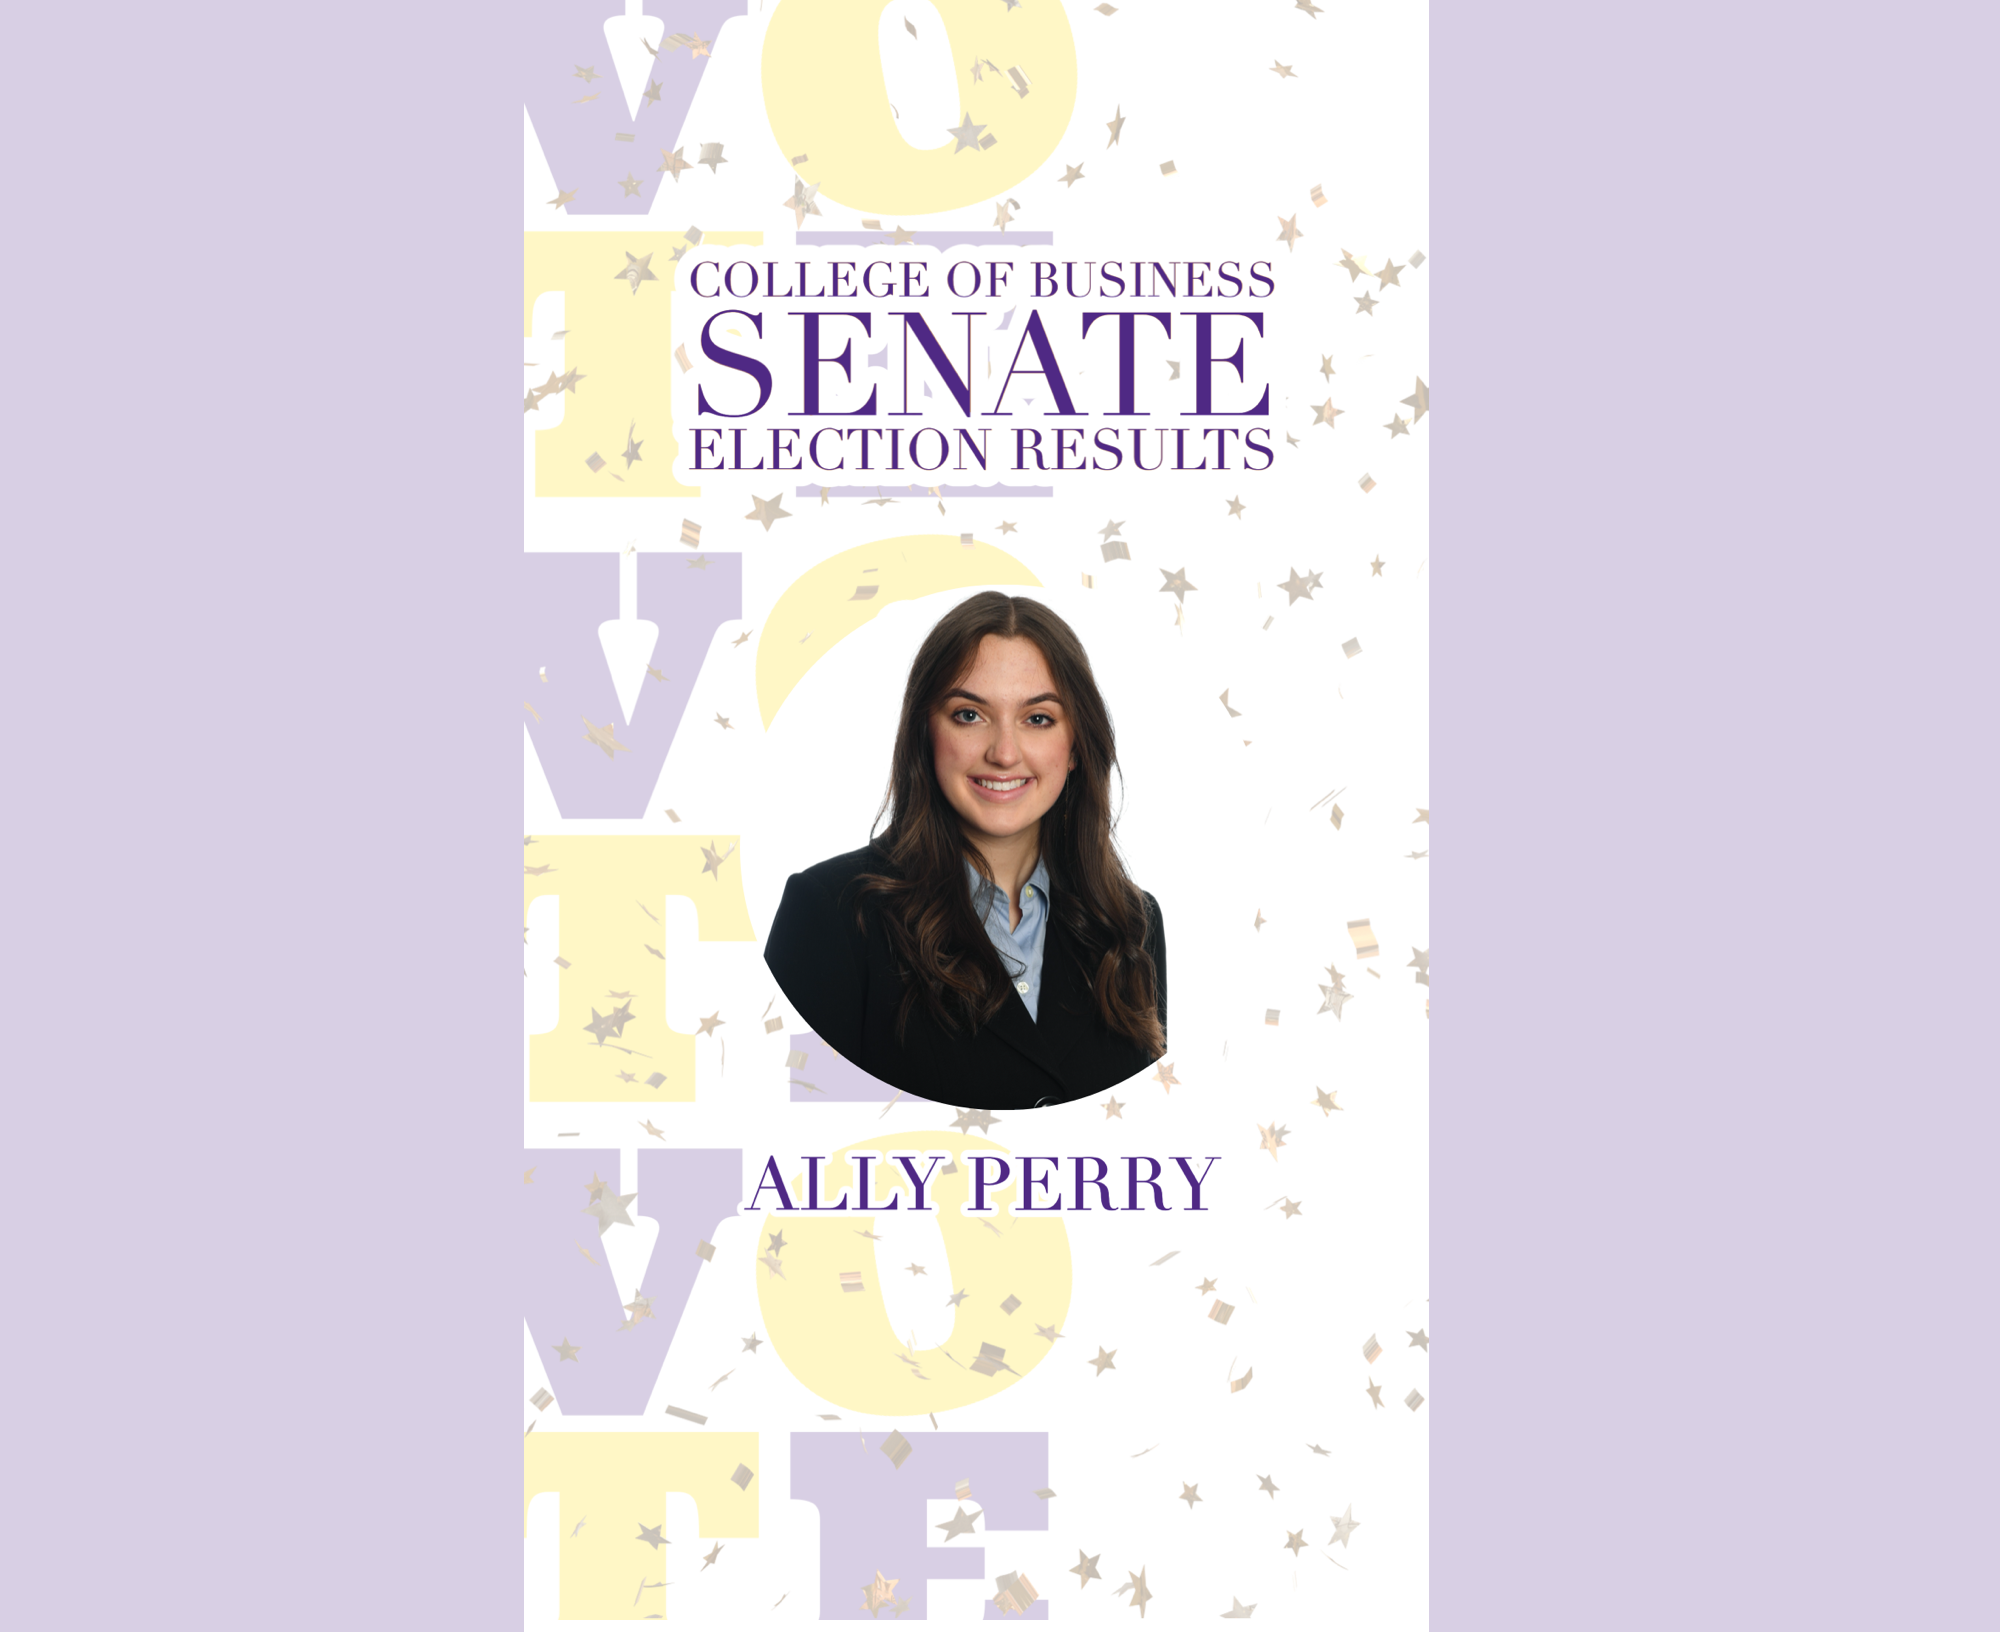 2022-2023 College of Business Senator: Ally Perry